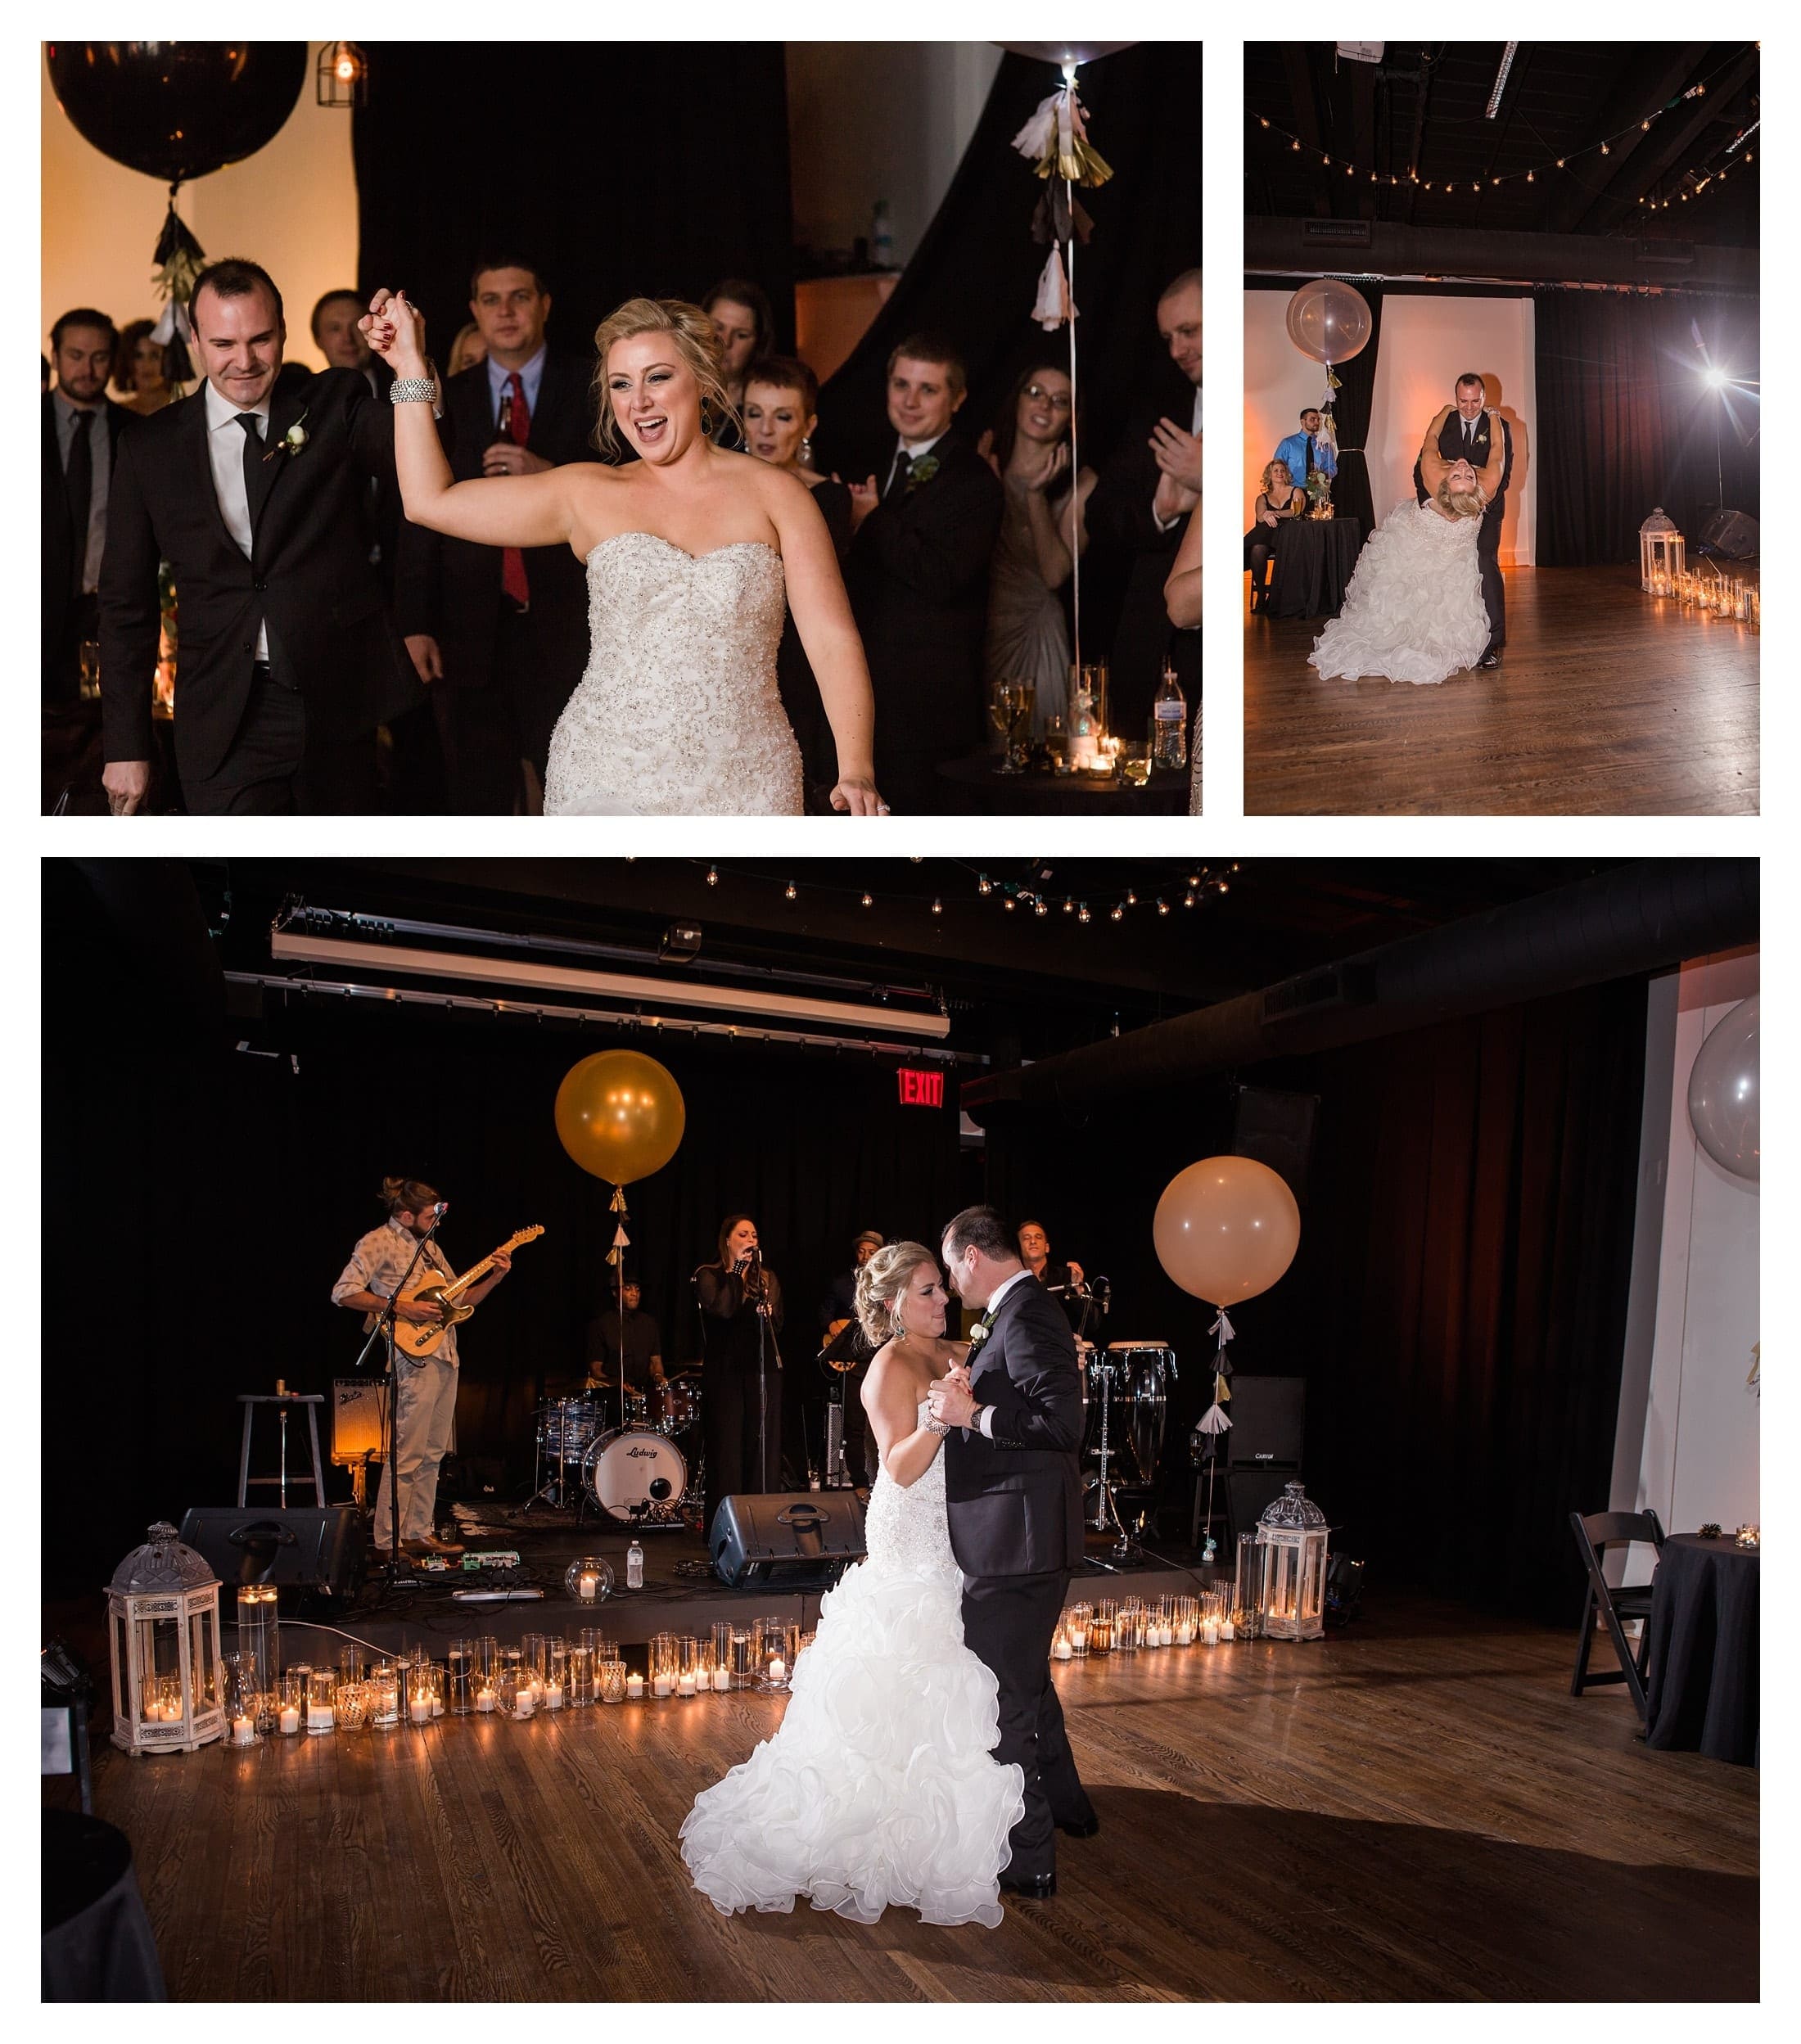 Bride and Groom First Dance, Photos of Bride and groom first dance, Candlelight Reception , Couple Announced at Wedding, The Broadcast Band at Altamont